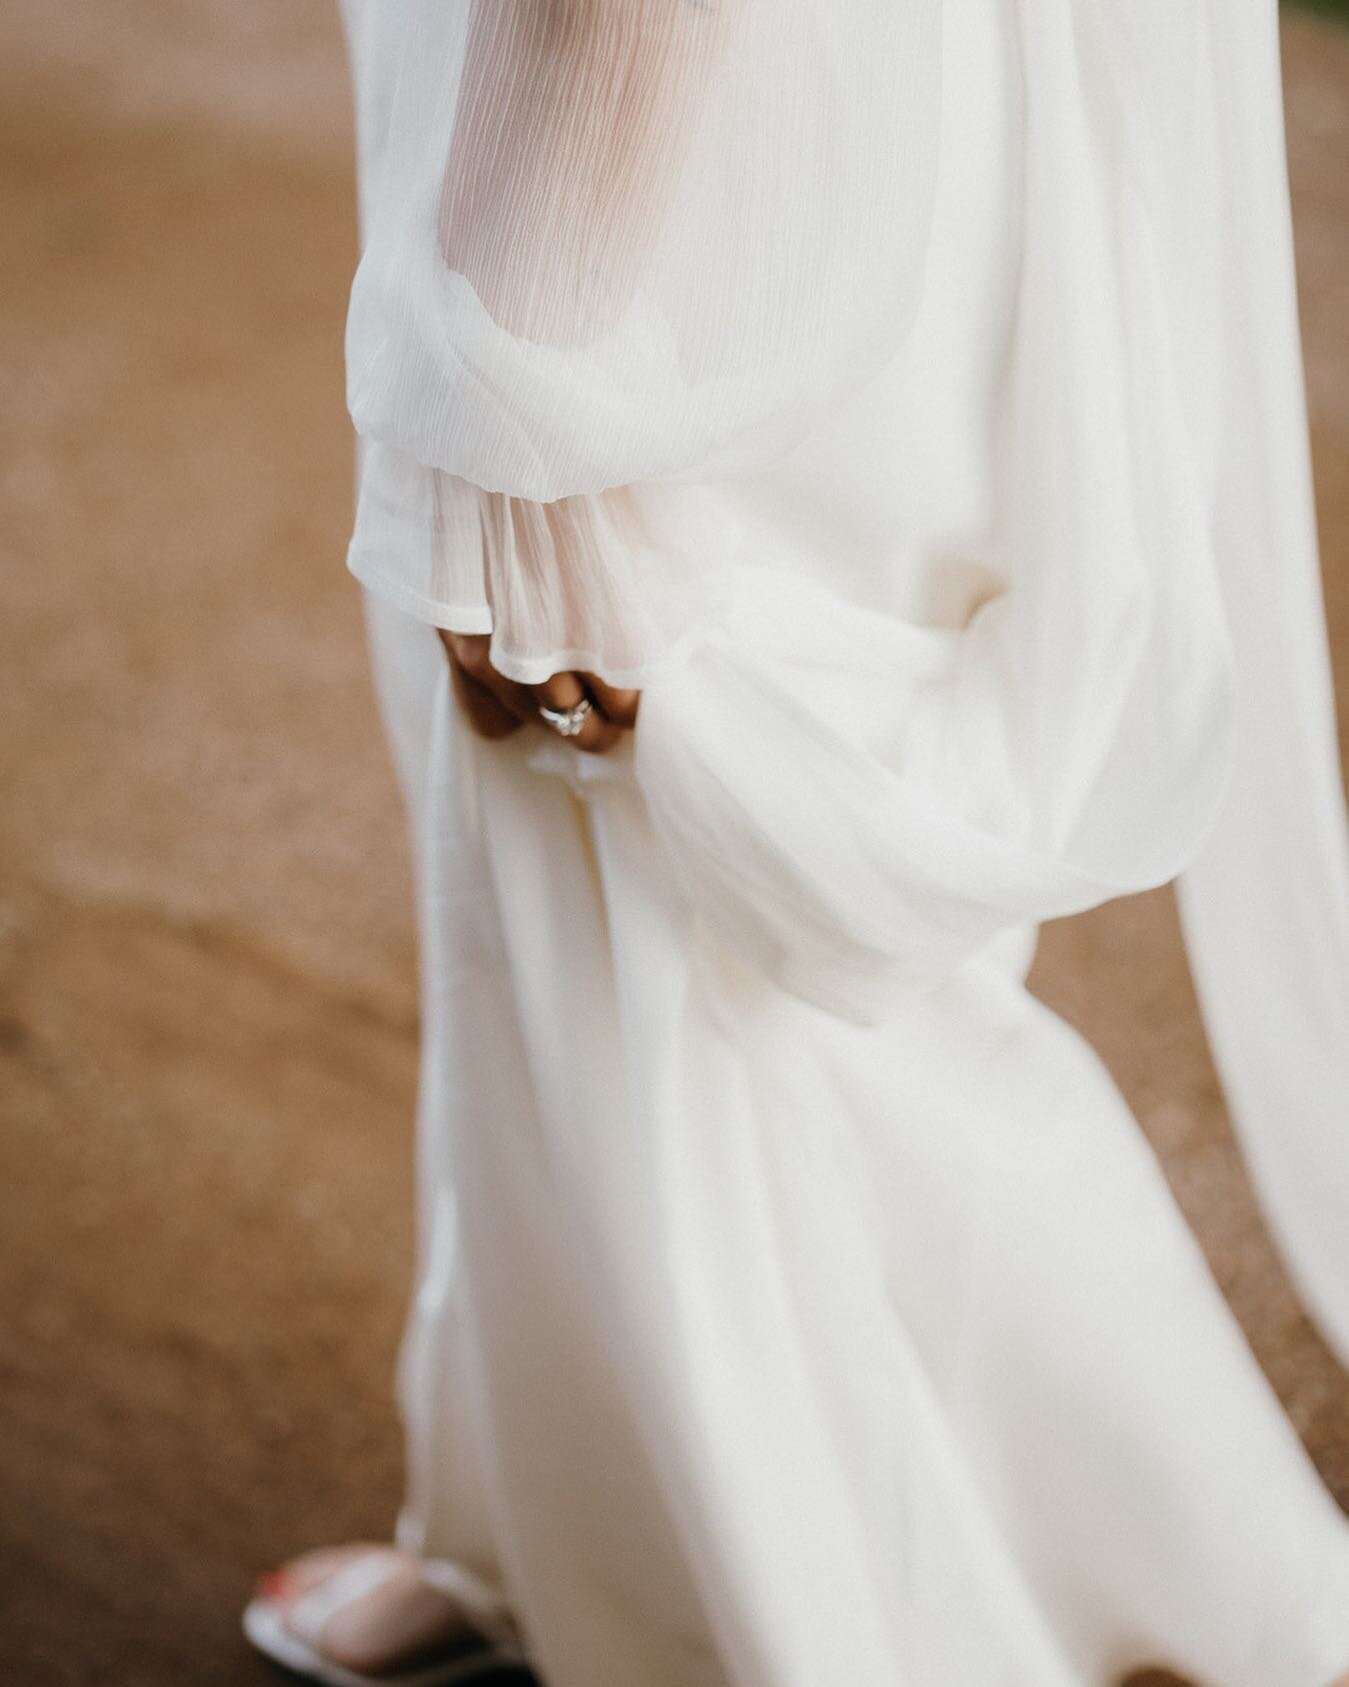 Still swooning over these sleeves 😍
⠀⠀⠀⠀⠀⠀⠀⠀⠀
⠀⠀⠀⠀⠀⠀⠀⠀⠀
⠀⠀⠀⠀⠀⠀⠀⠀⠀
⠀⠀⠀⠀⠀⠀⠀⠀⠀
⠀⠀⠀⠀⠀⠀⠀⠀⠀
⠀⠀⠀⠀⠀⠀⠀⠀⠀
⠀⠀⠀⠀⠀⠀⠀⠀⠀
#newzealandweddingphotographer #aucklandweddingphotographer #aucklandelopement #nzelopement #weddinginspo #bridalstyle #elopementinspo #bridetr